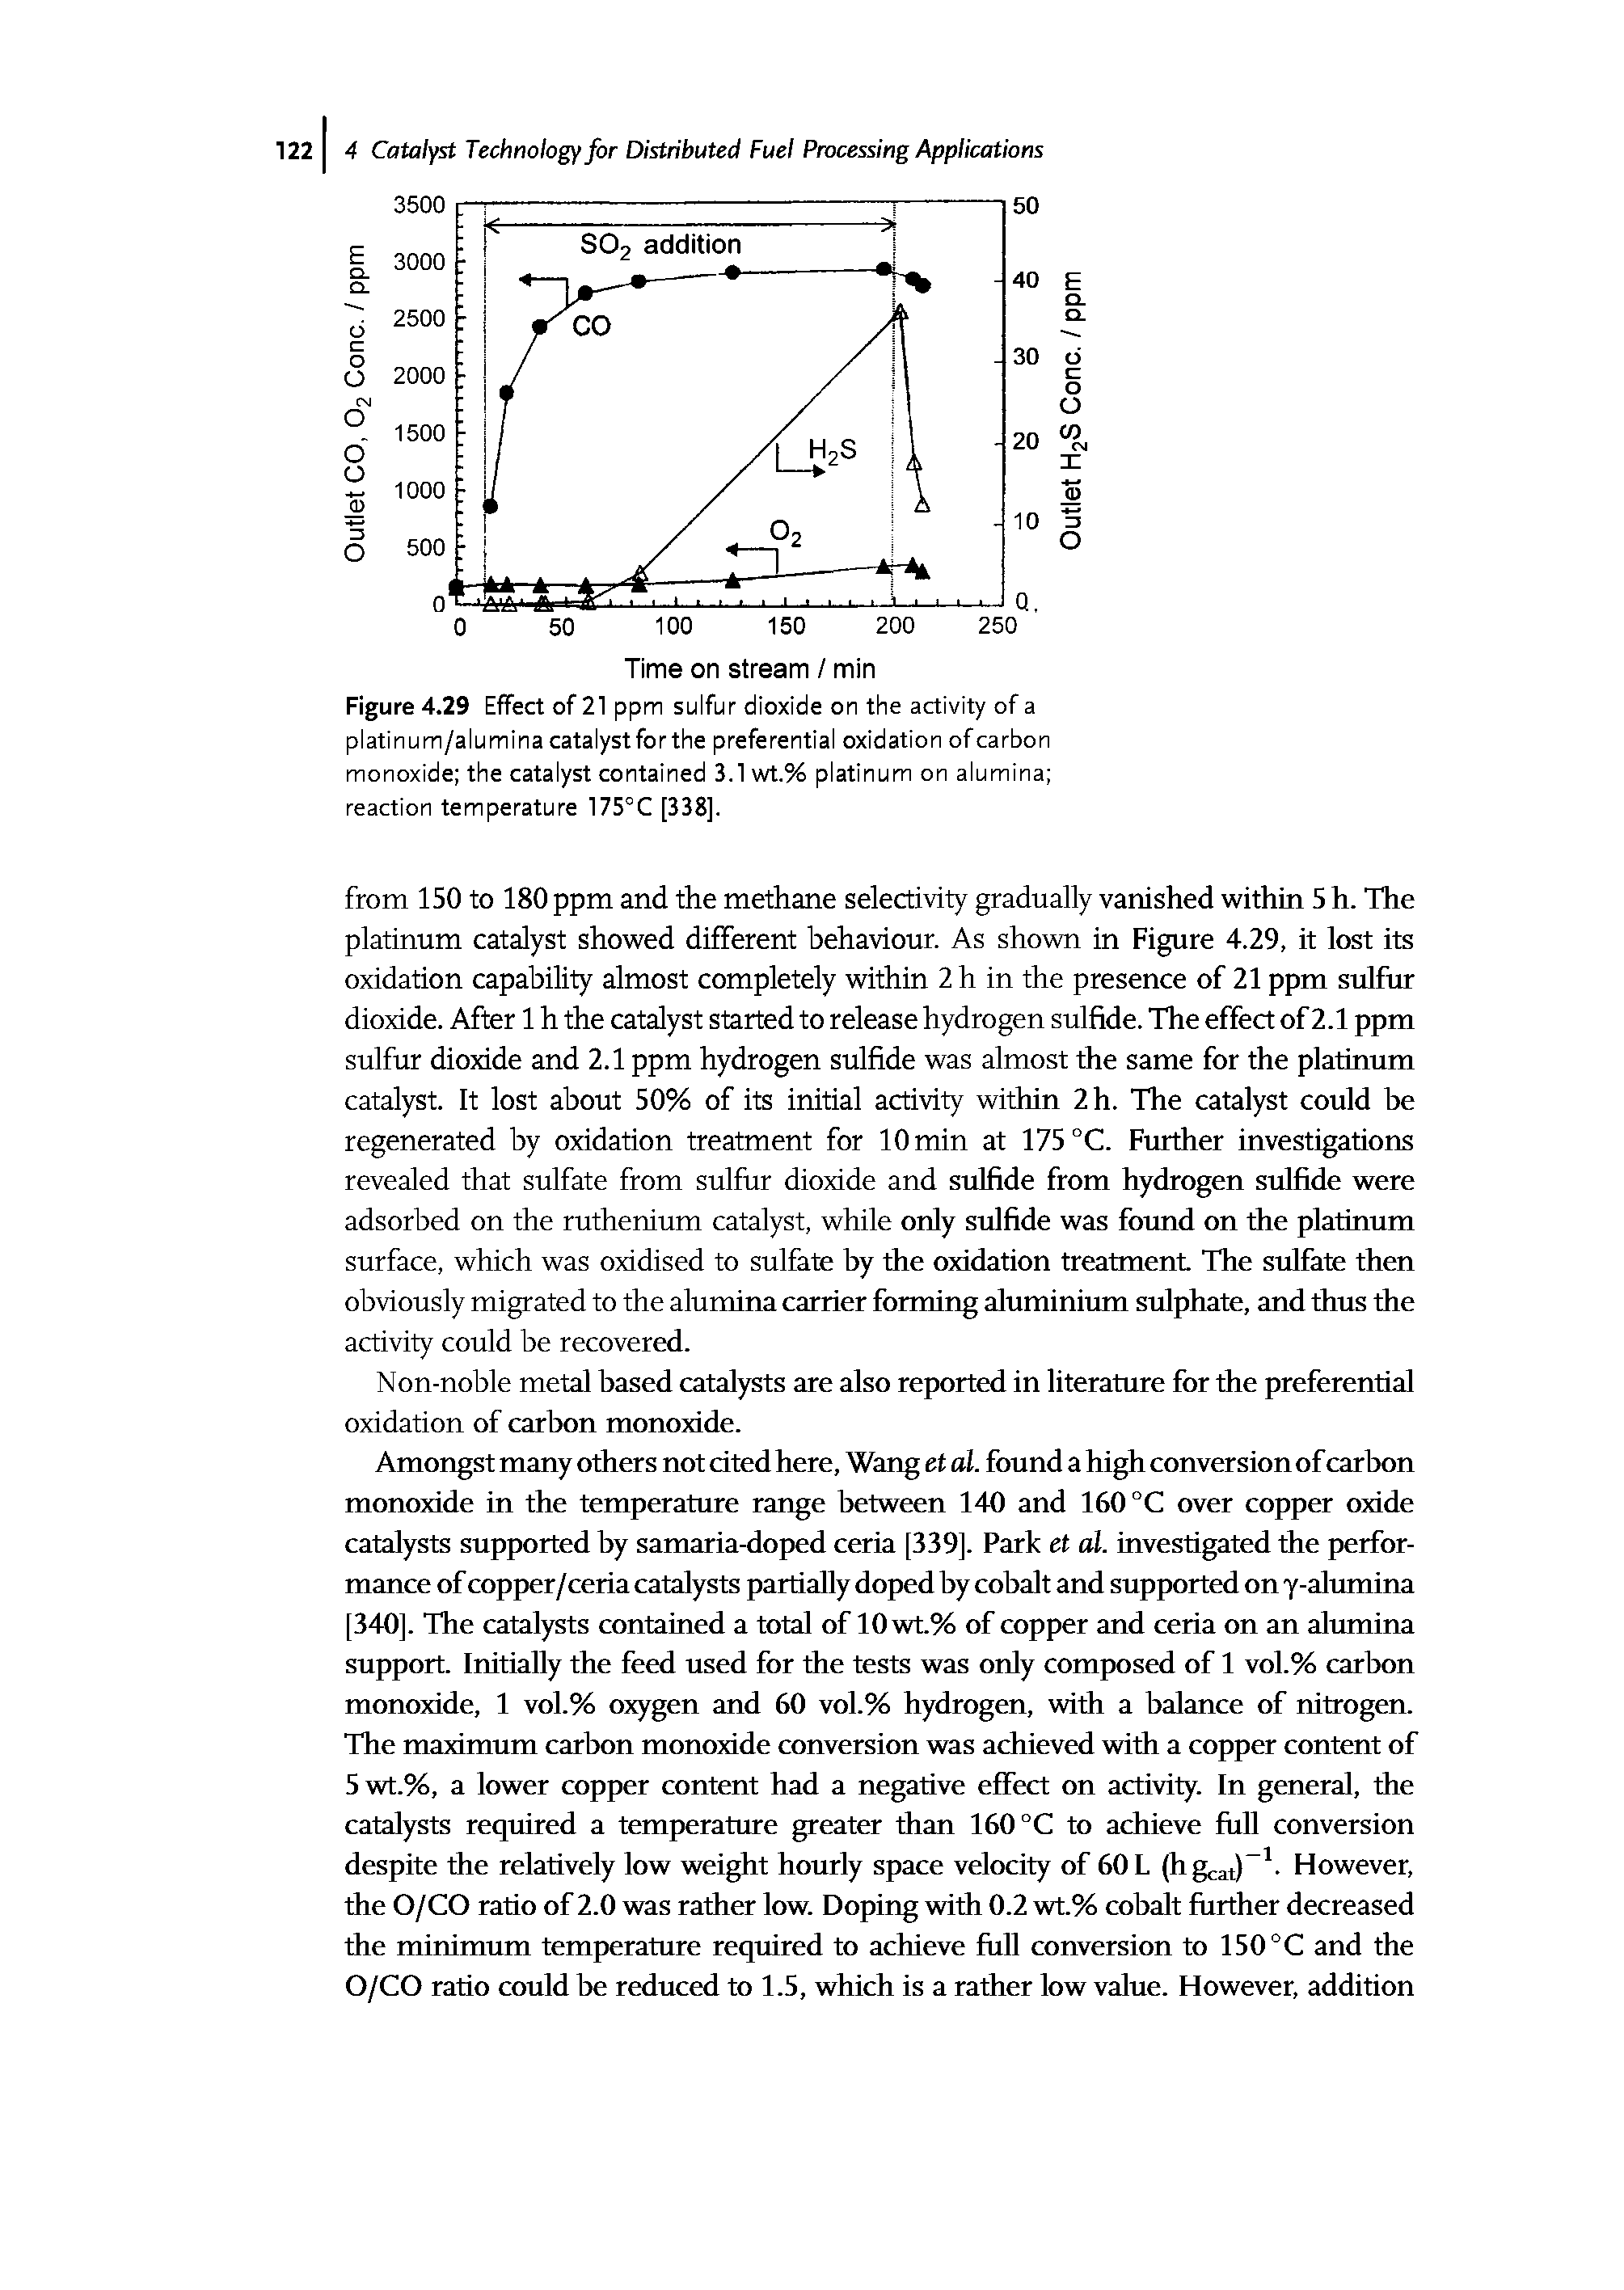 Figure 4.29 Effect of 21 ppm sulfur dioxide on the activity of a platinum/alumina catalyst for the preferential oxidation of carbon monoxide the catalyst contained 3.1 wt.% platinum on alumina reaction temperature 175°C [338].